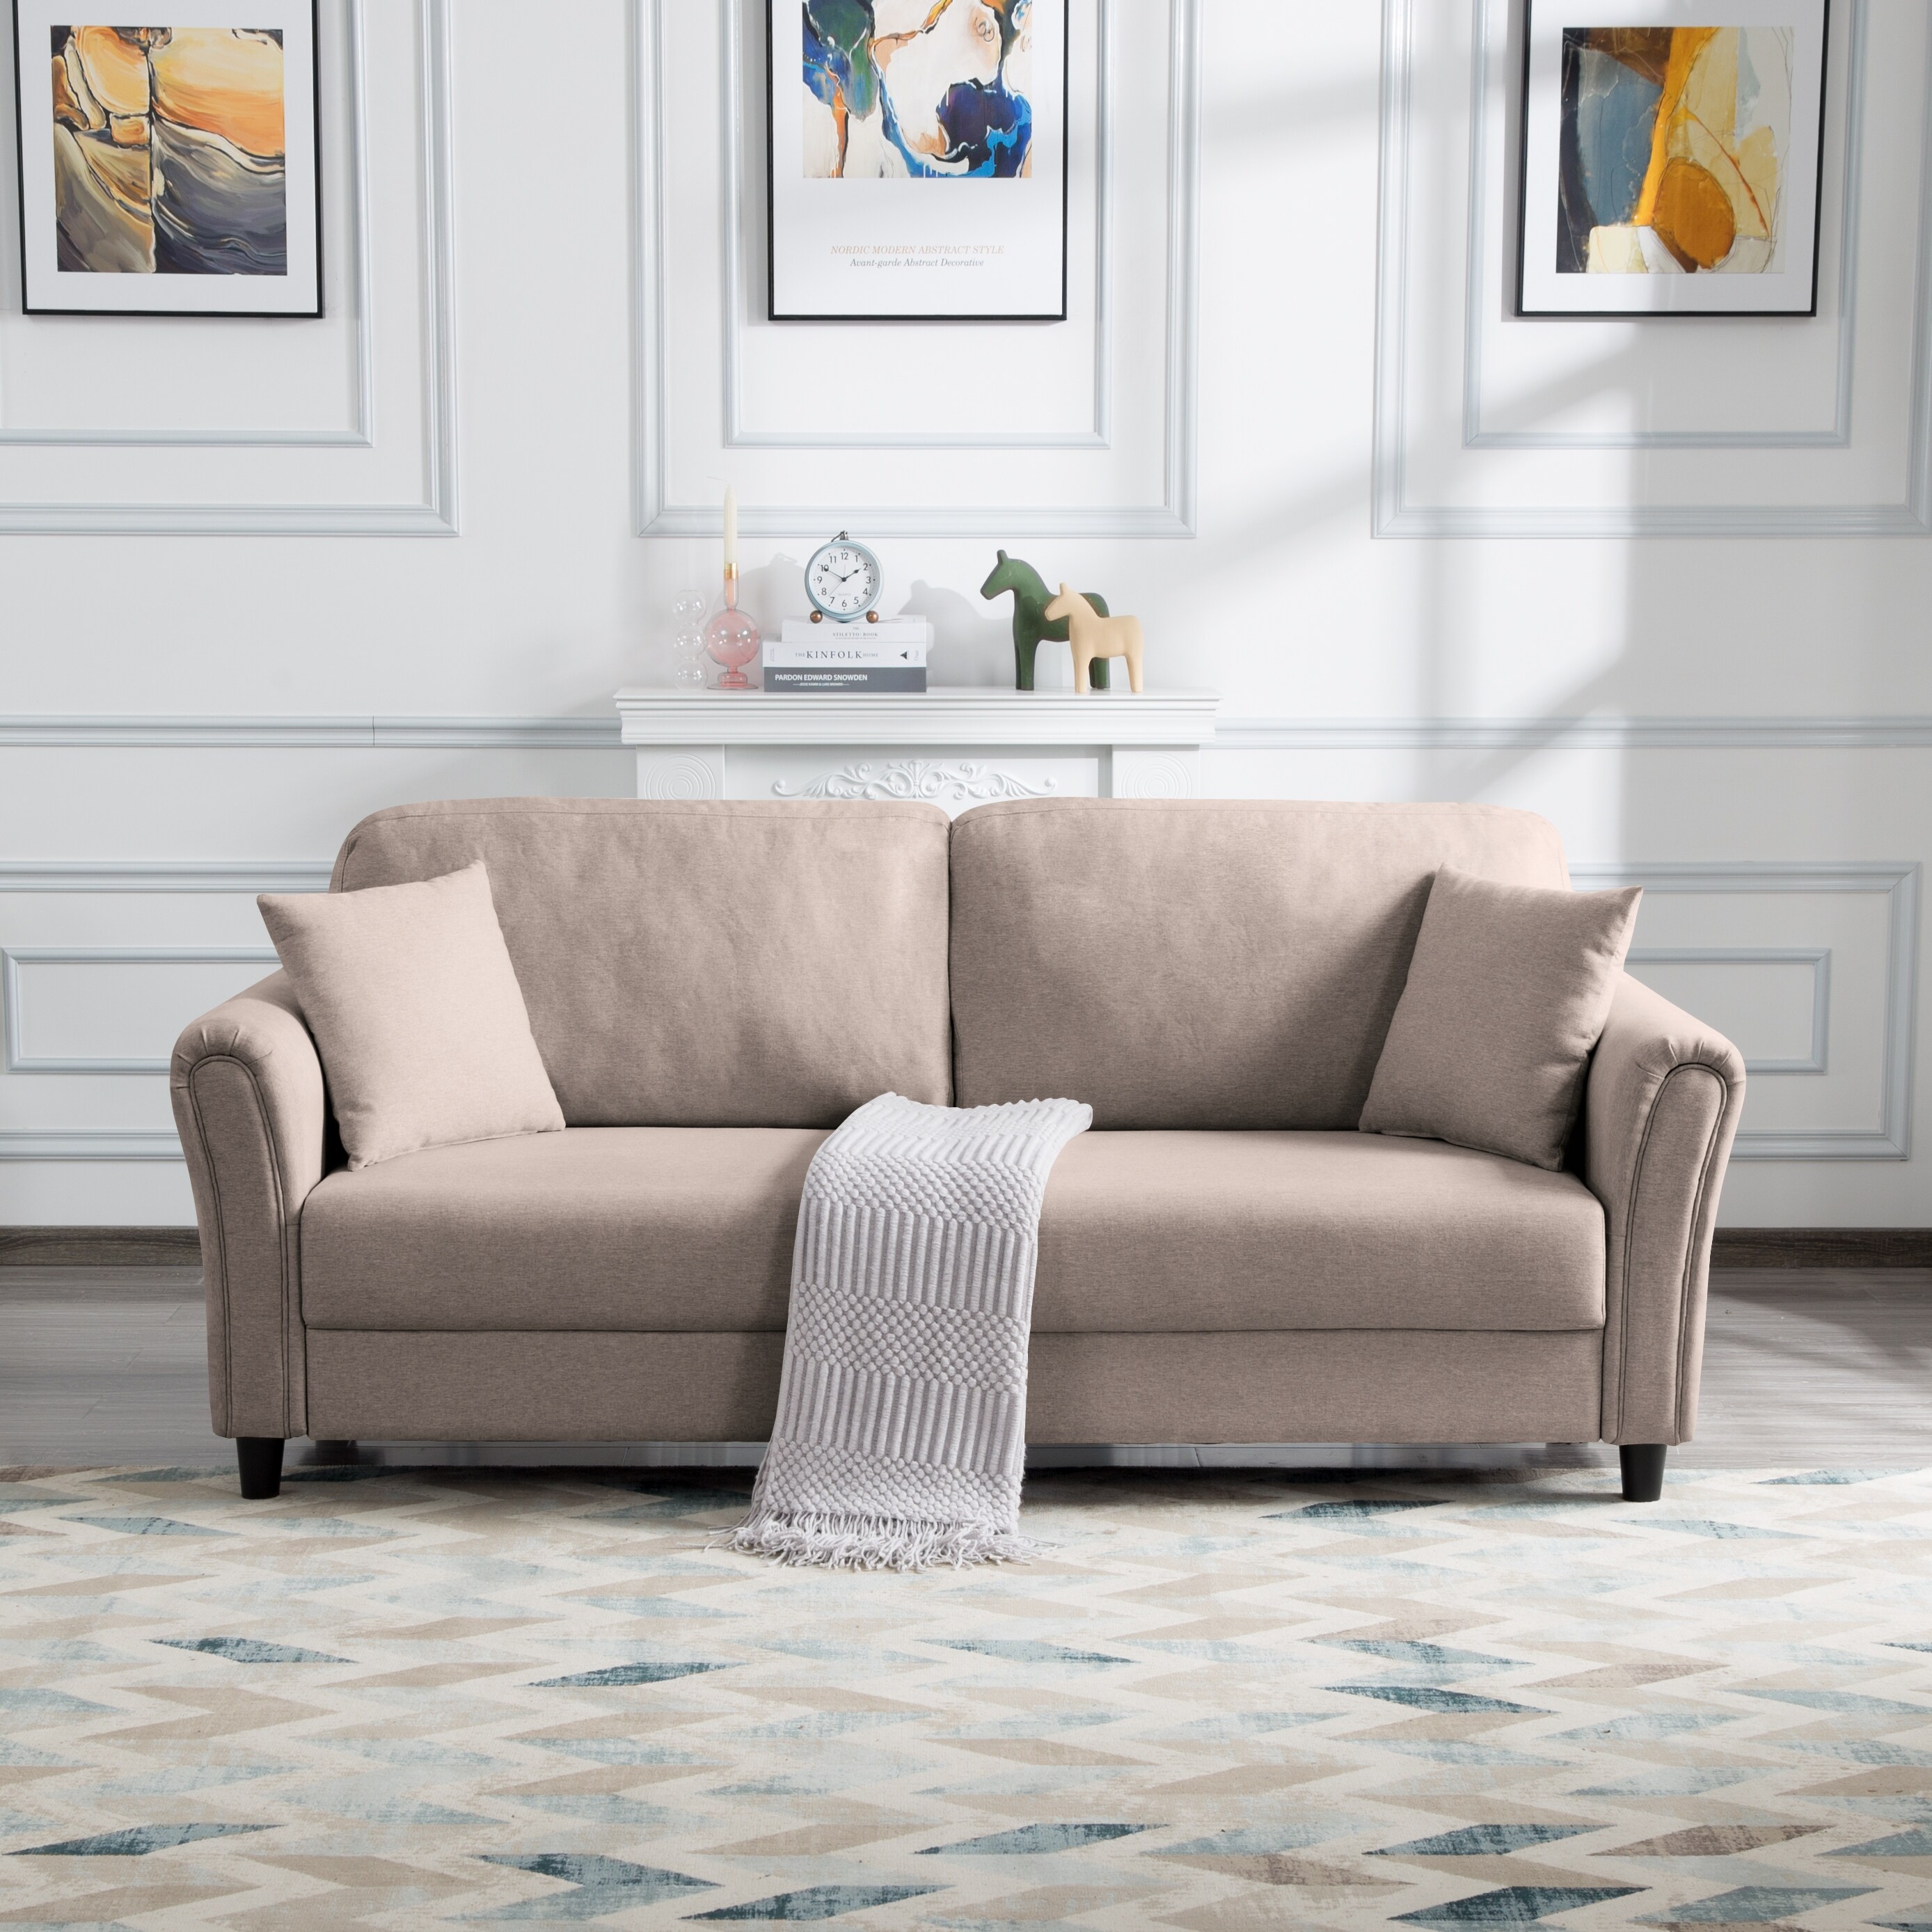 Linen Fabric Upholstered Sofa 3 Seater Removable Back Cushions Couch for  Living Room with Throw Pillows and Square Arms - Bed Bath & Beyond -  38427900